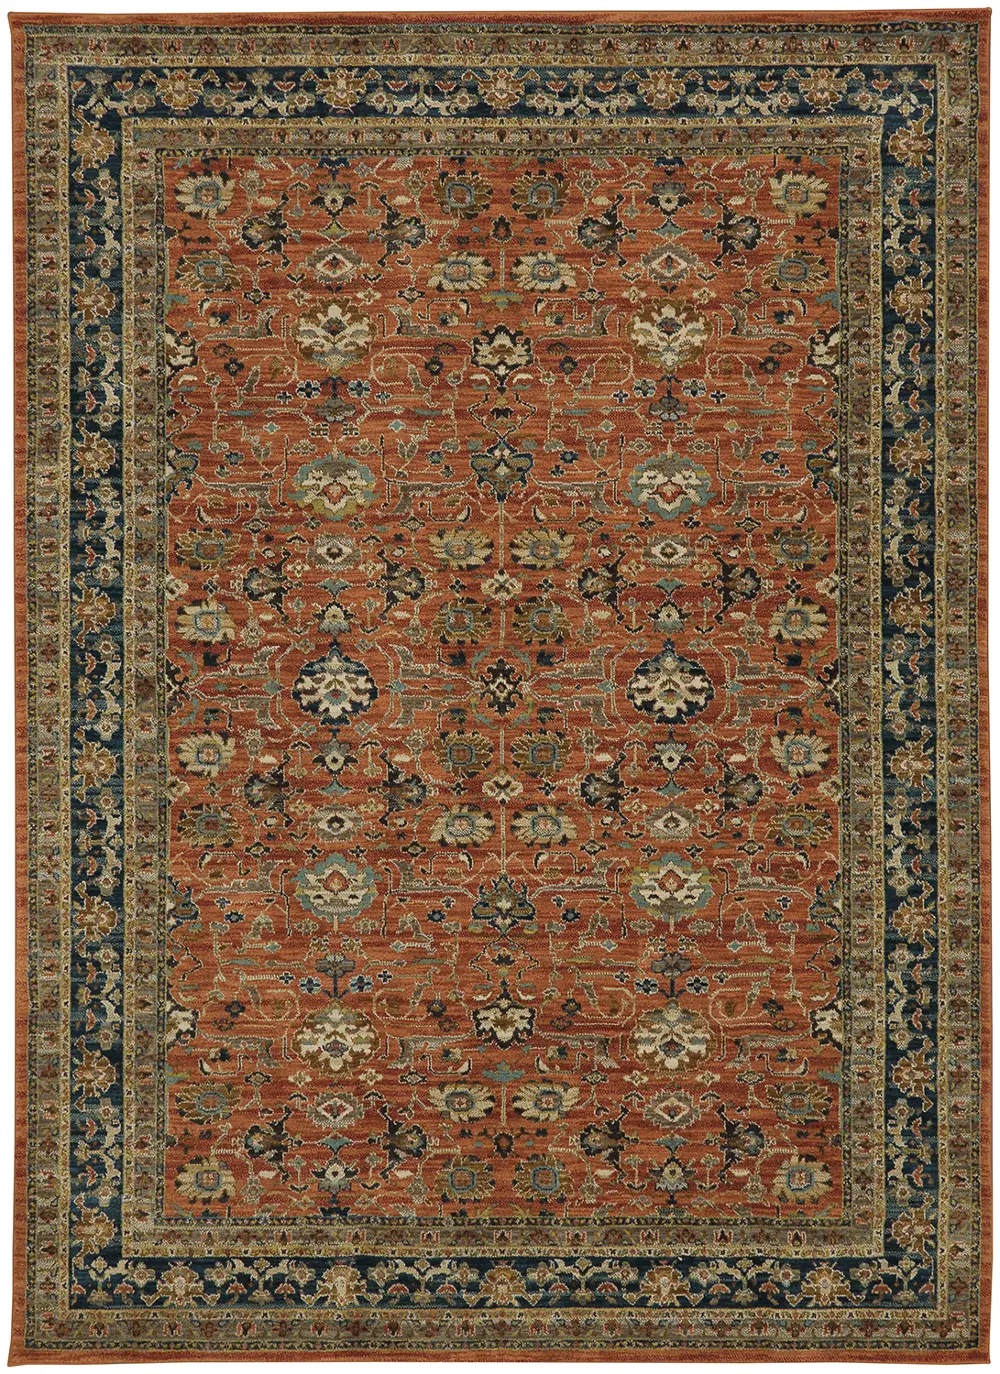 90936-20044/8X11/KER 8 x 11 Large Keralam Spice Red Area Rug - Spice Market-1